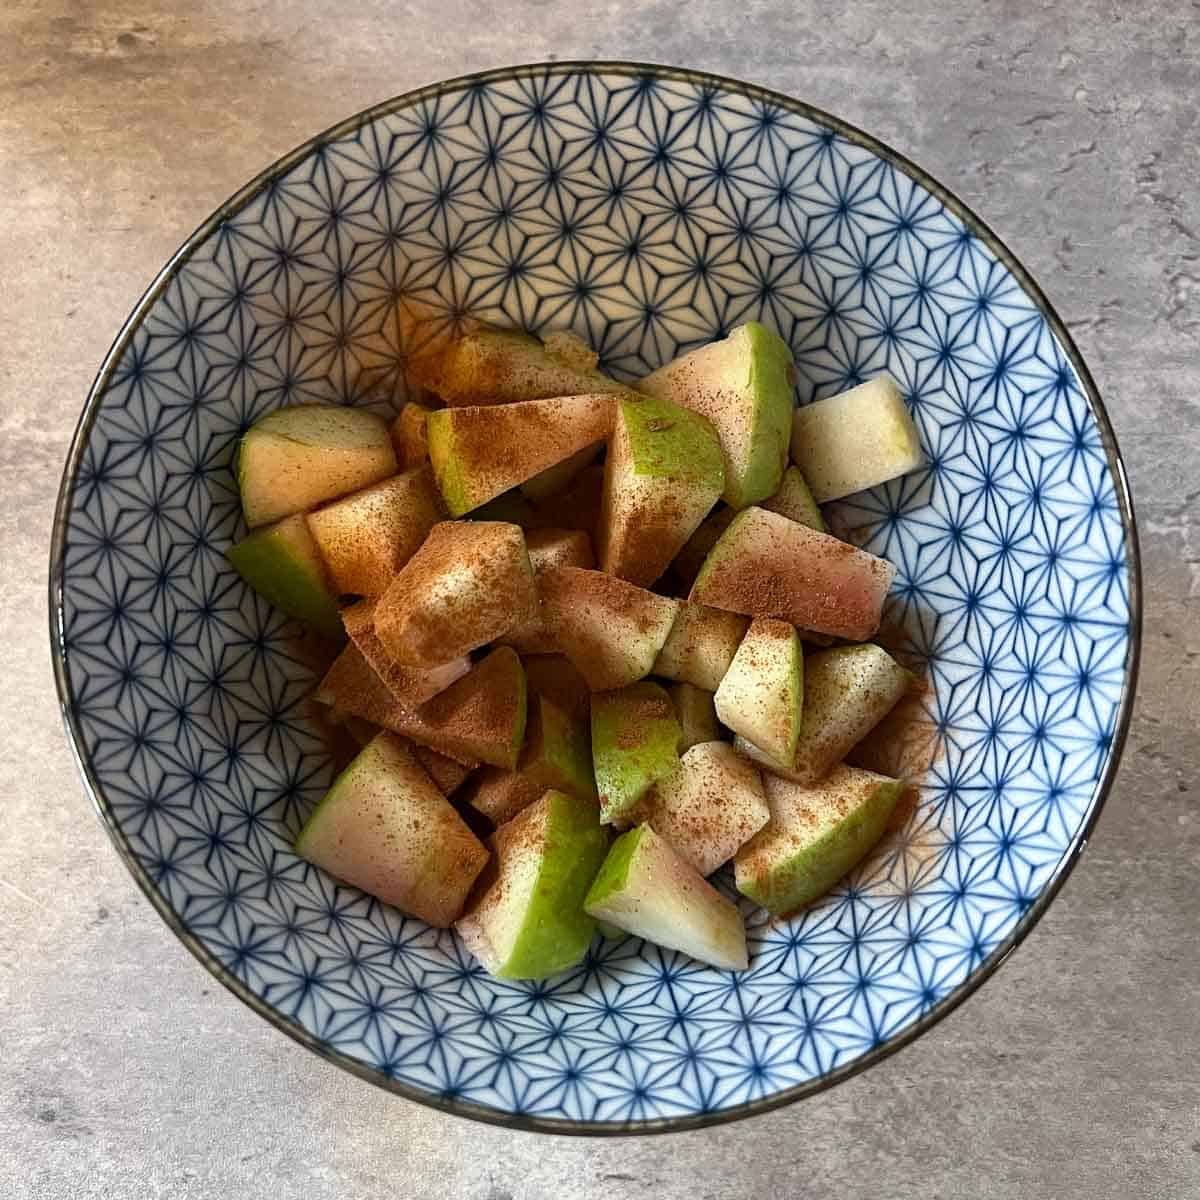 diced green apples with cinnamon and syrup in small blue bowl